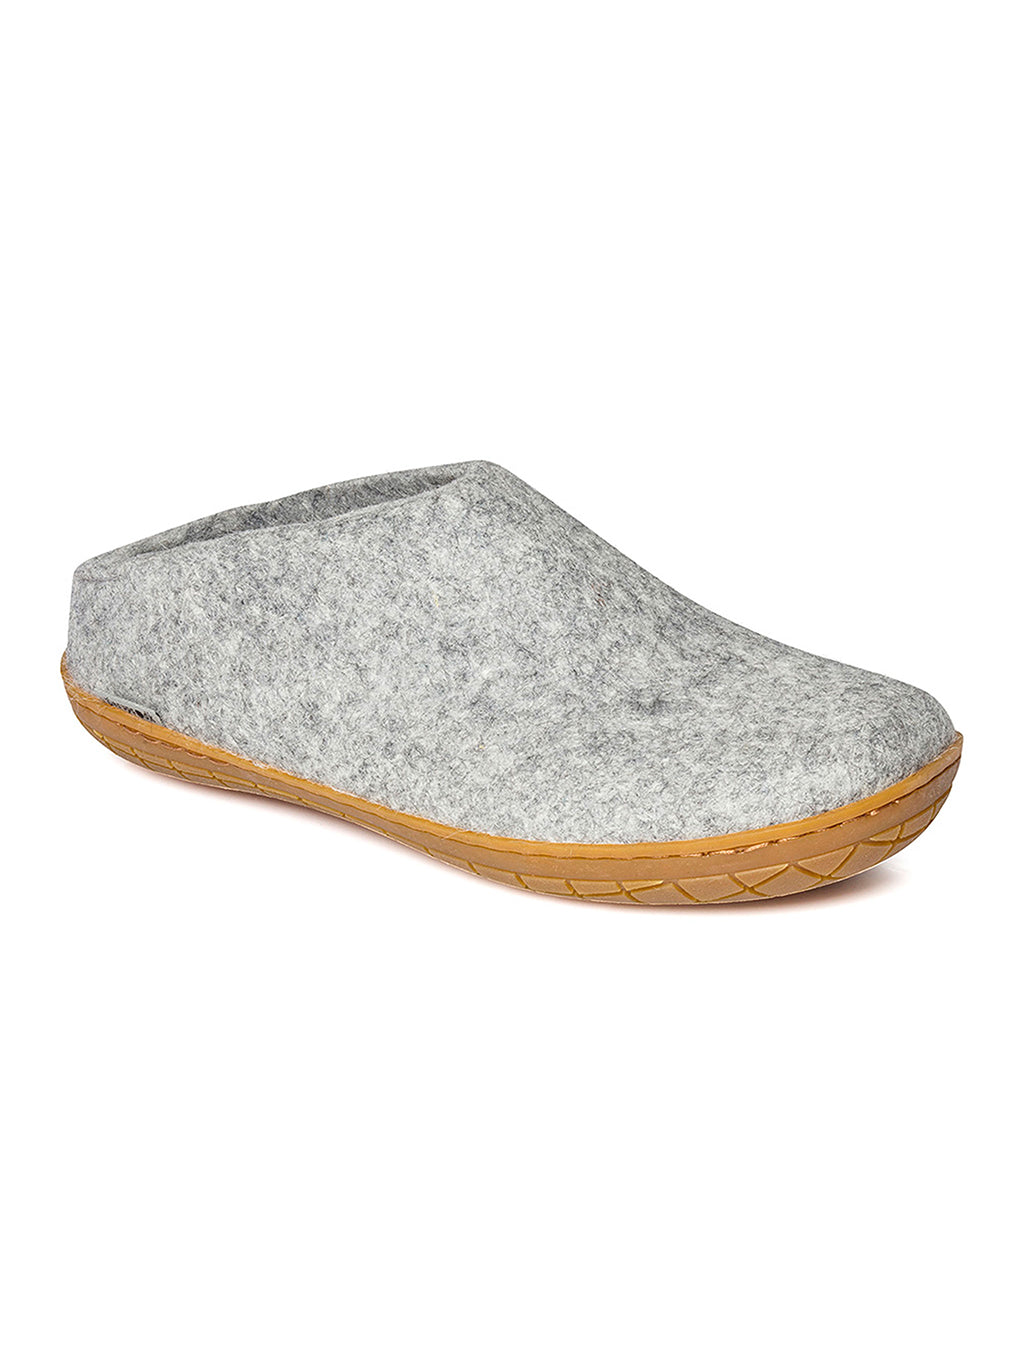 Gray wool slipper with rubber sole